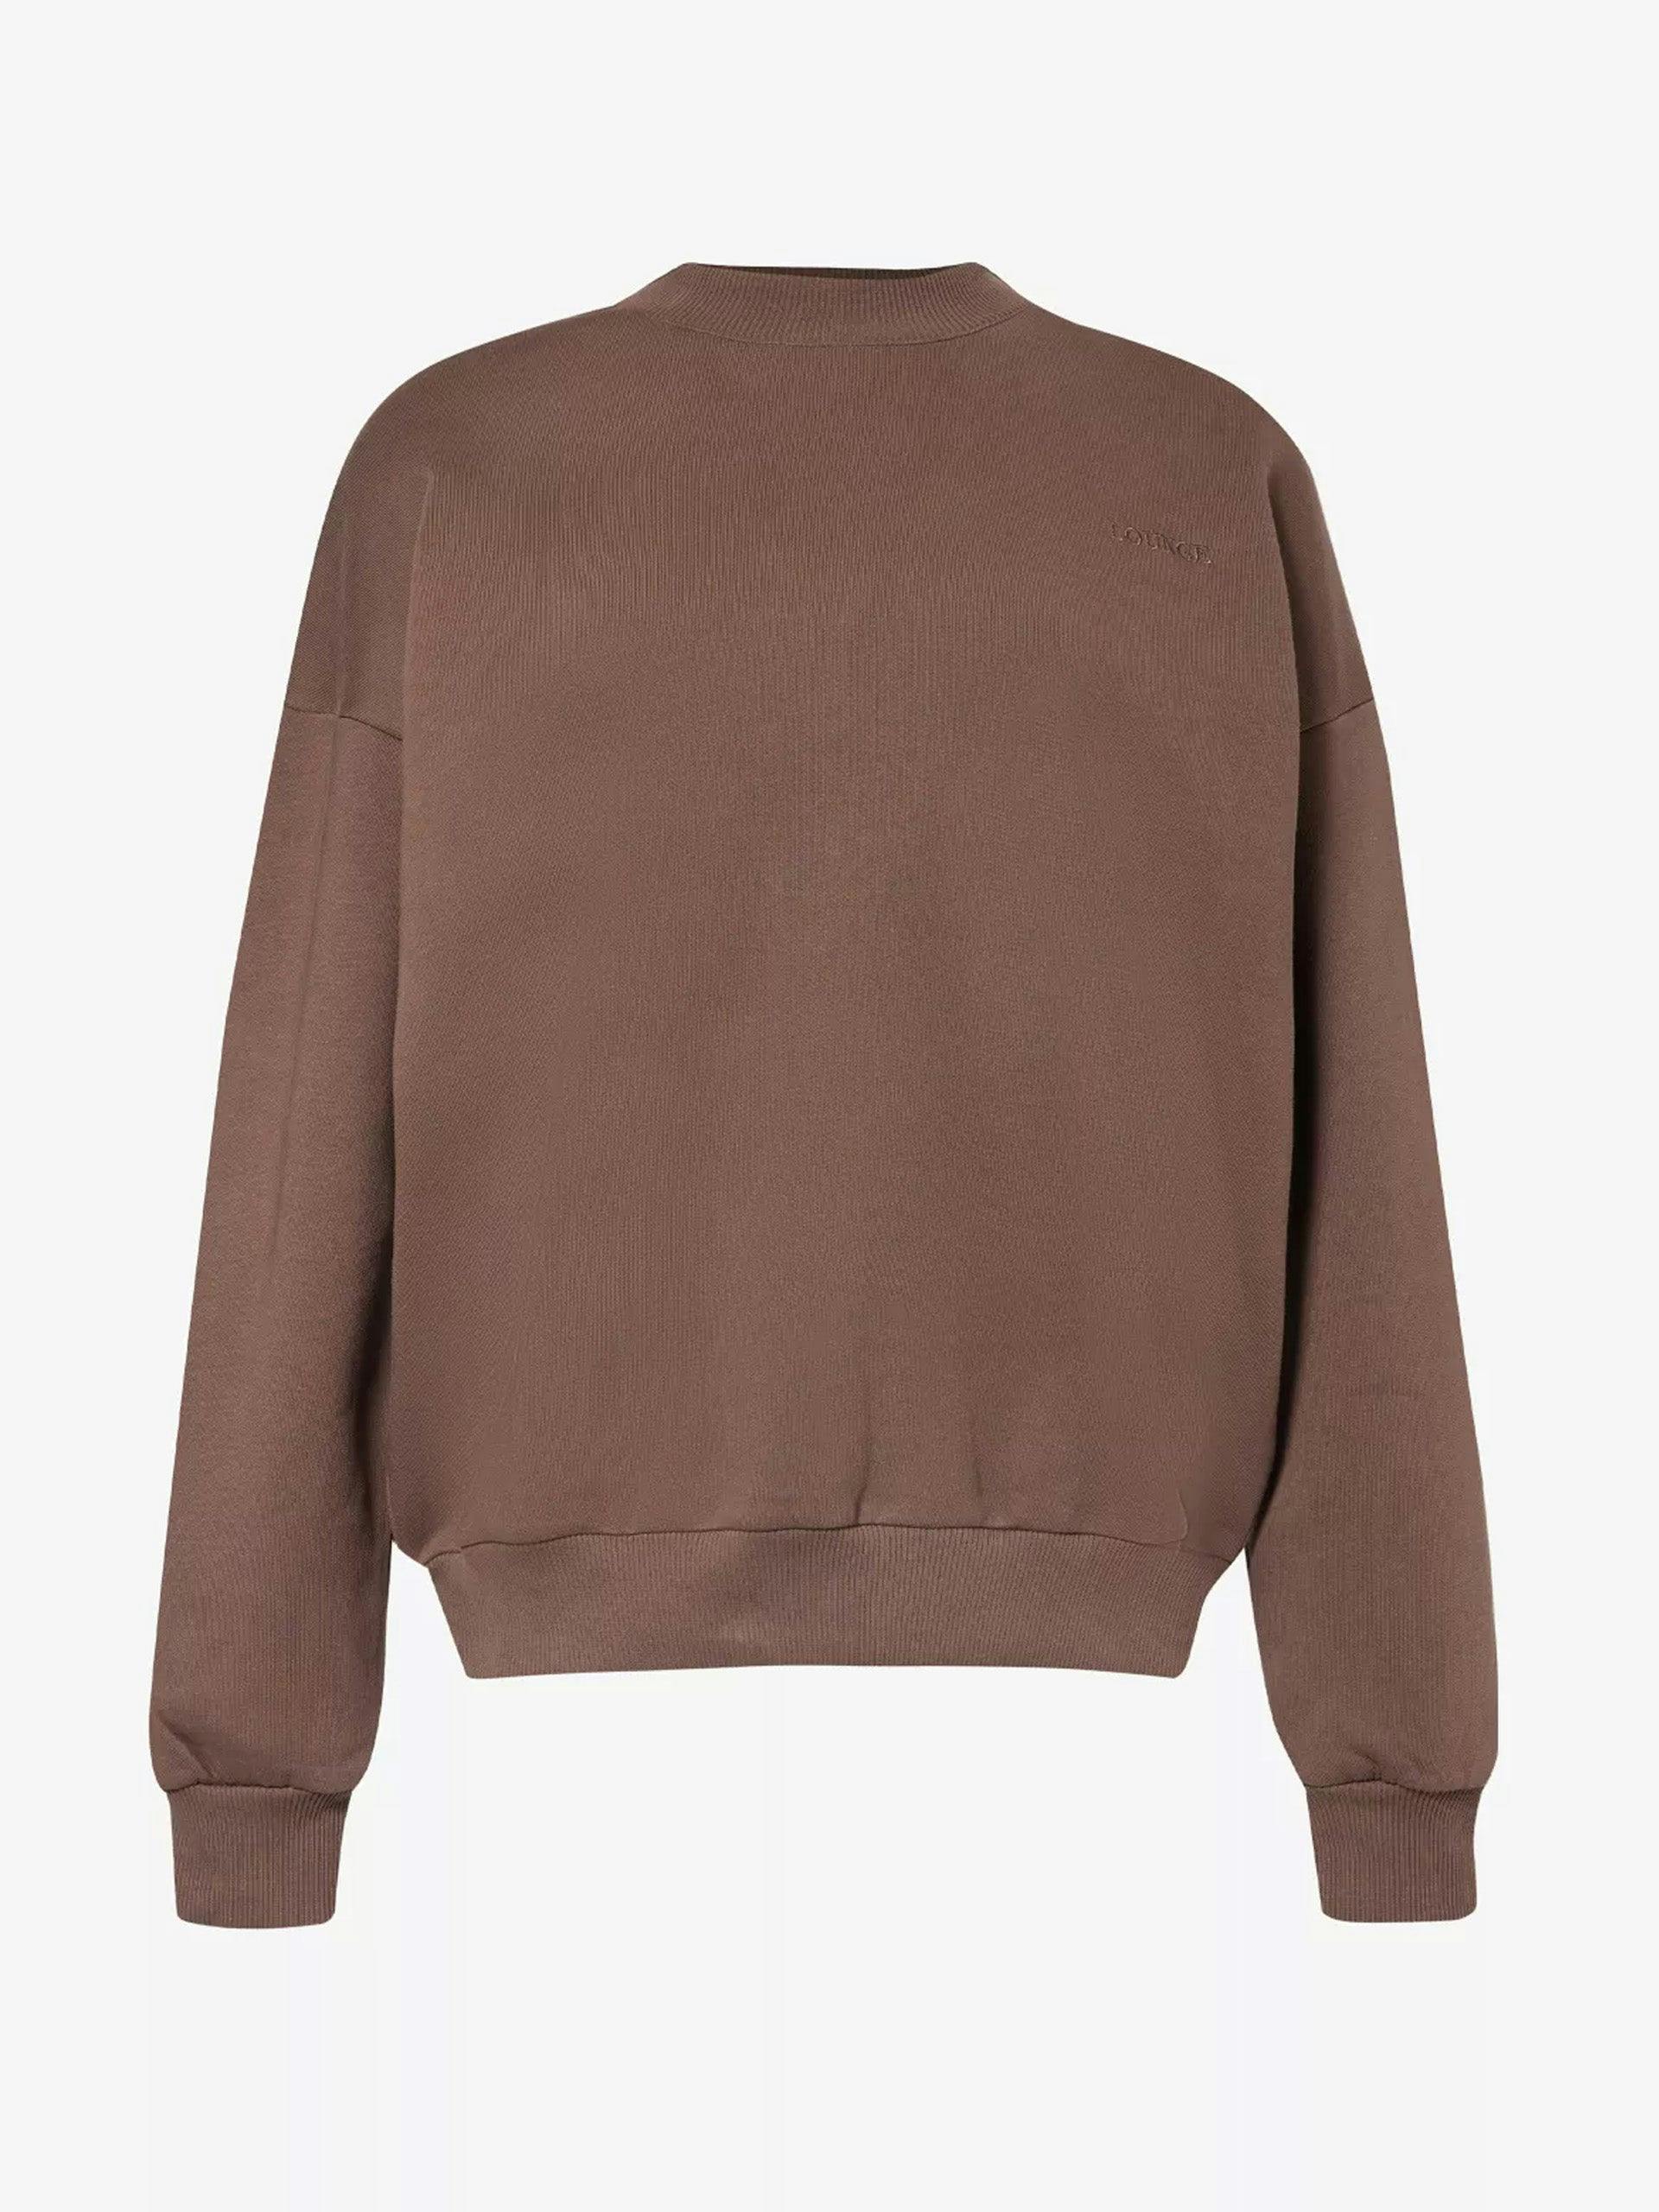 Essential relaxed-fit cotton-jersey sweatshirt